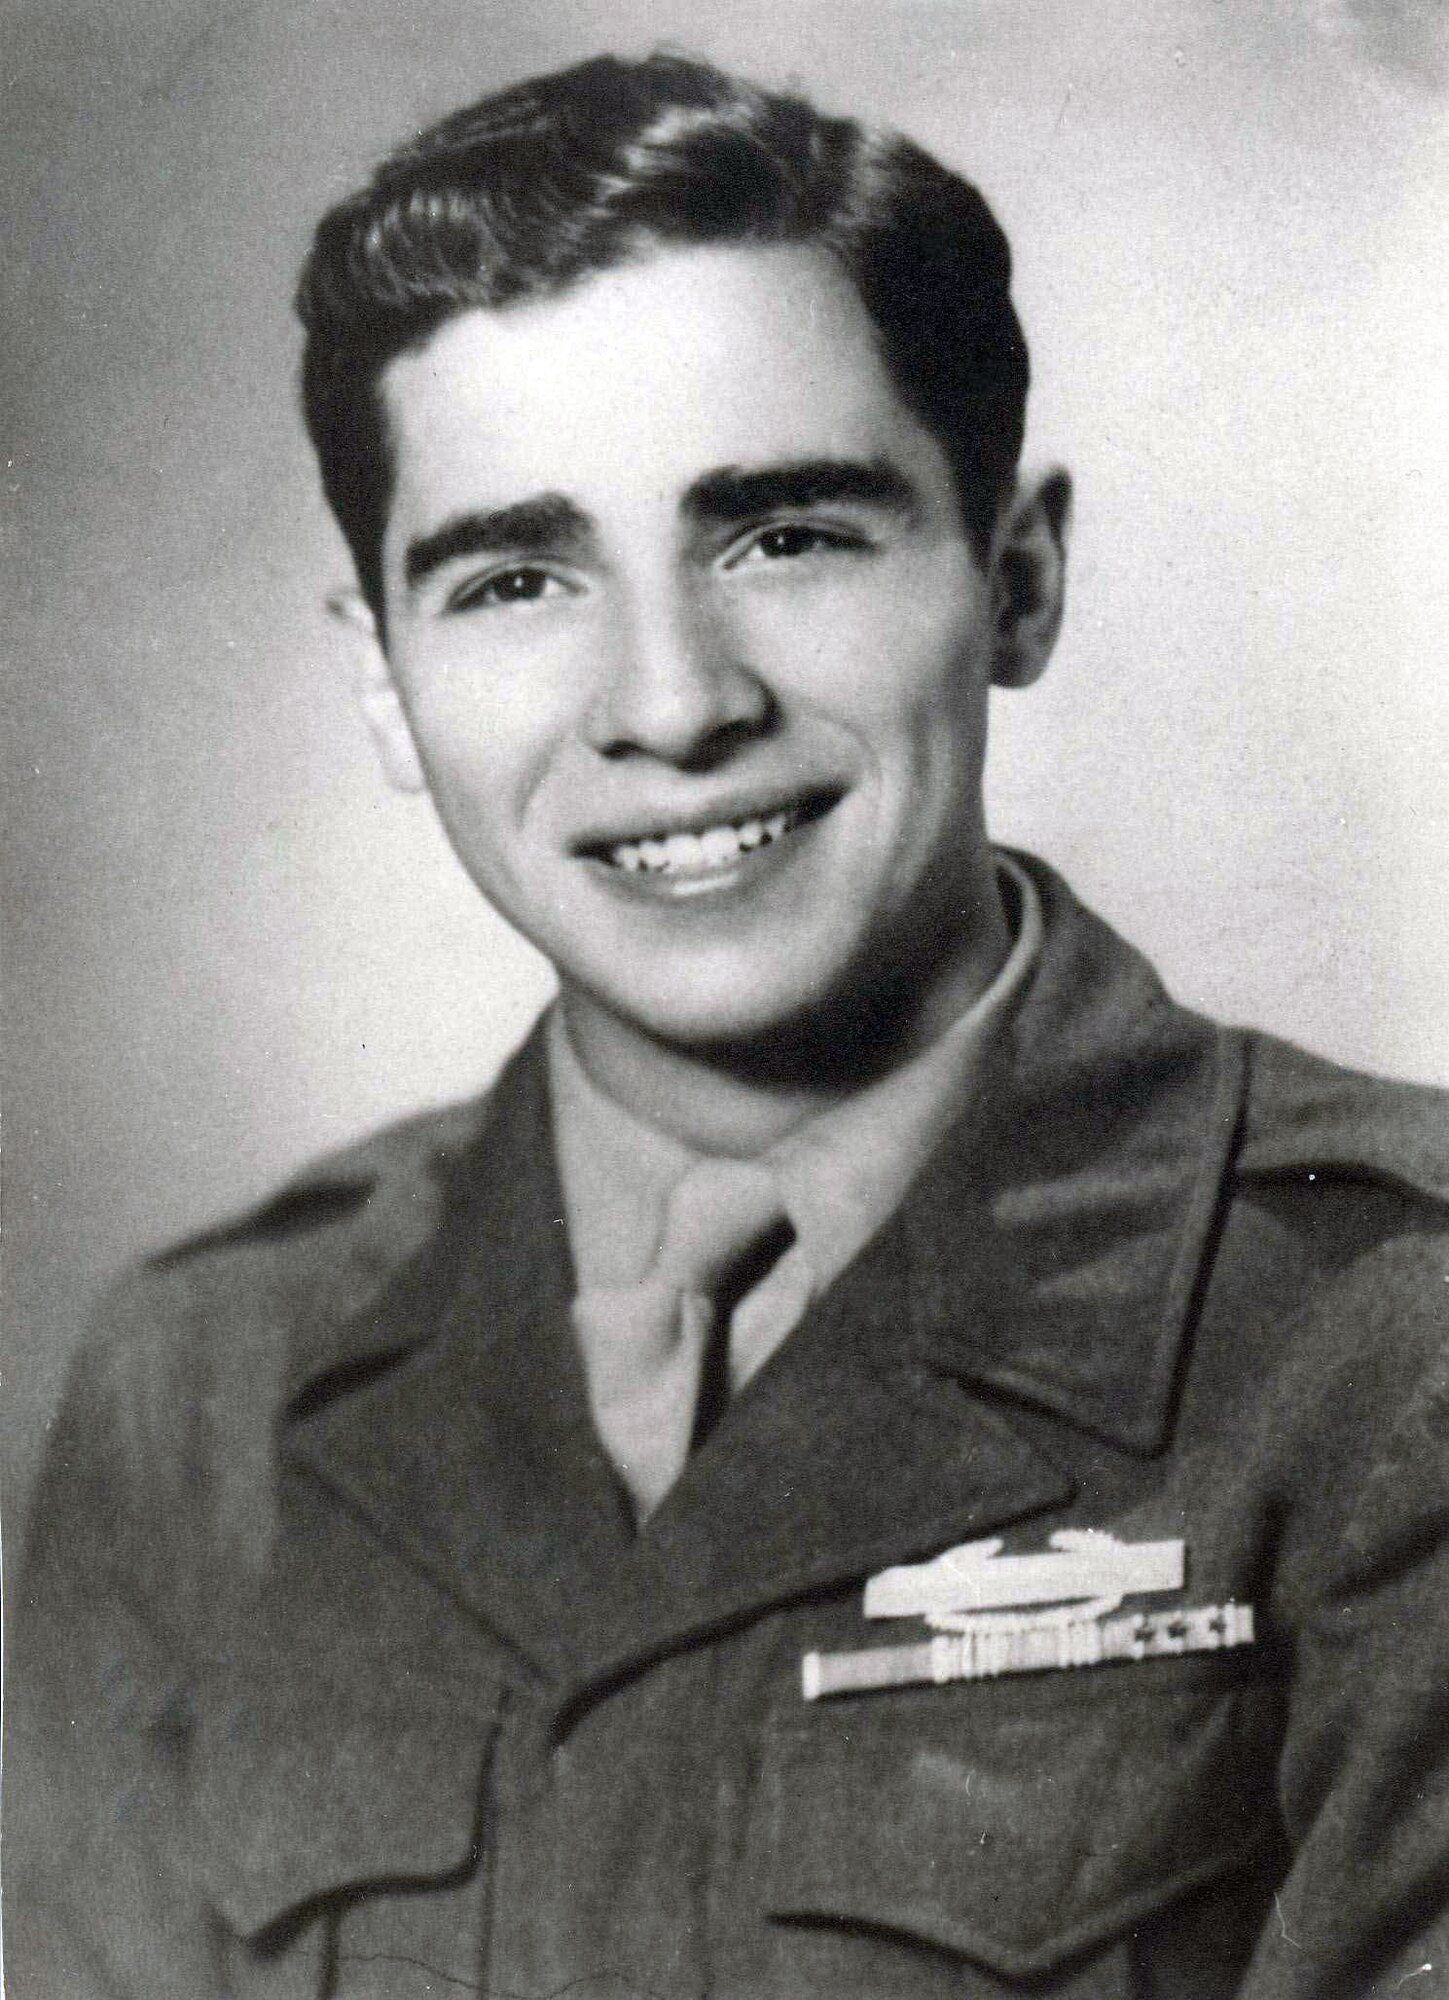 Army Sgt. Anthony Duno pictured in 1944 as an infantryman serving under Army Gen. George S. Patton's 3rd Army during World War II. Now as the U.S. Air Force in Europe's real estate chief with nearly 60 years of service, he is the second longest serving Air Force civilian. During a recent office call, Secretary of the Air Force Michael B. Donley commended Mr. Duno for his life of service and remarked he is a shining example of its strong calling. (Courtesy photo) 